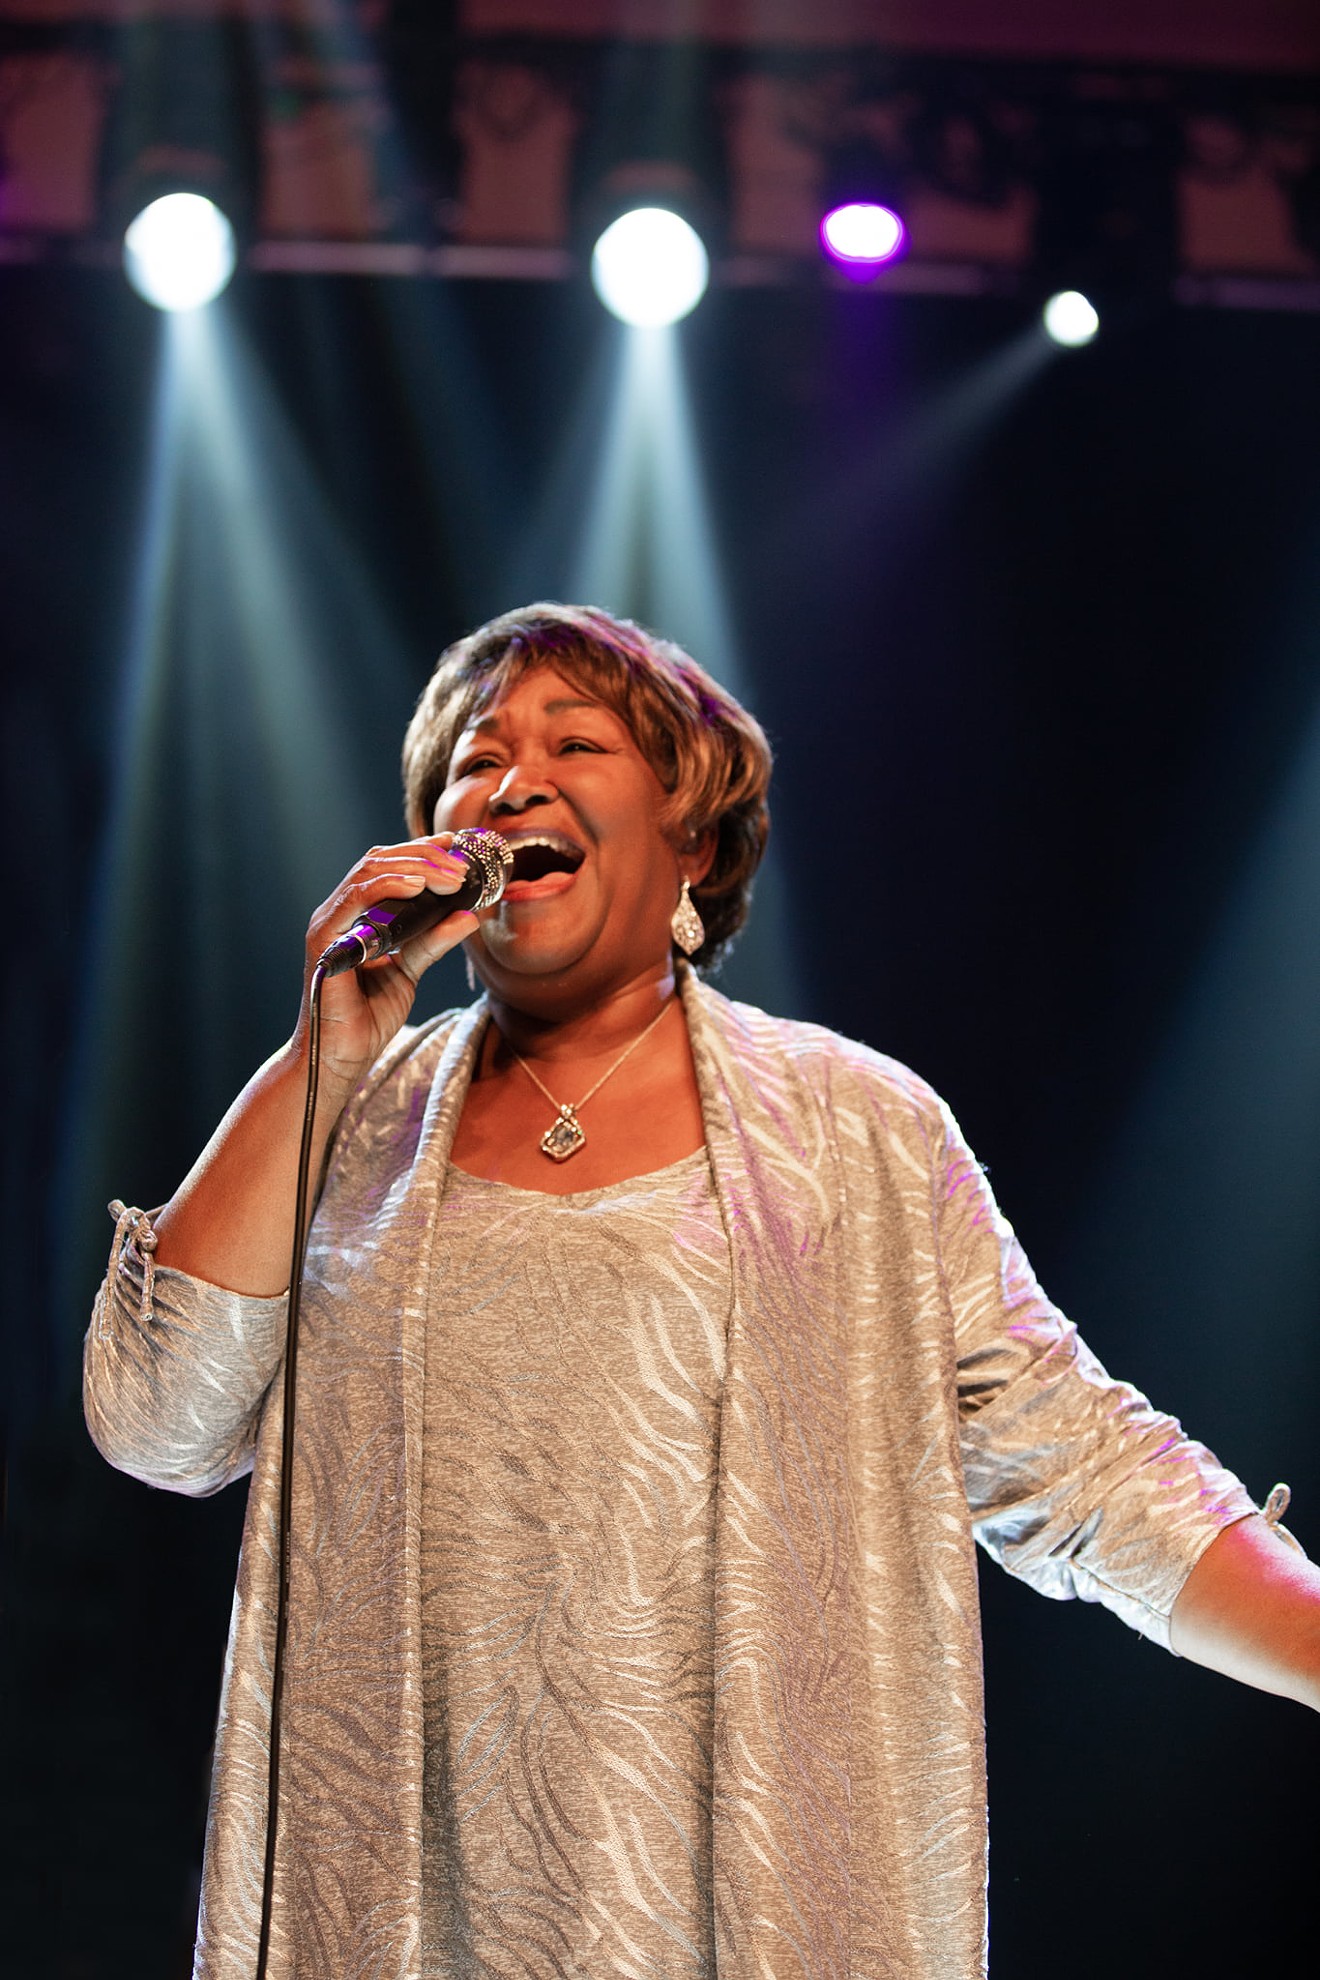 Hazel Miller and her seven-piece band, the Collective, will perform a free show on Sunday, June 19.